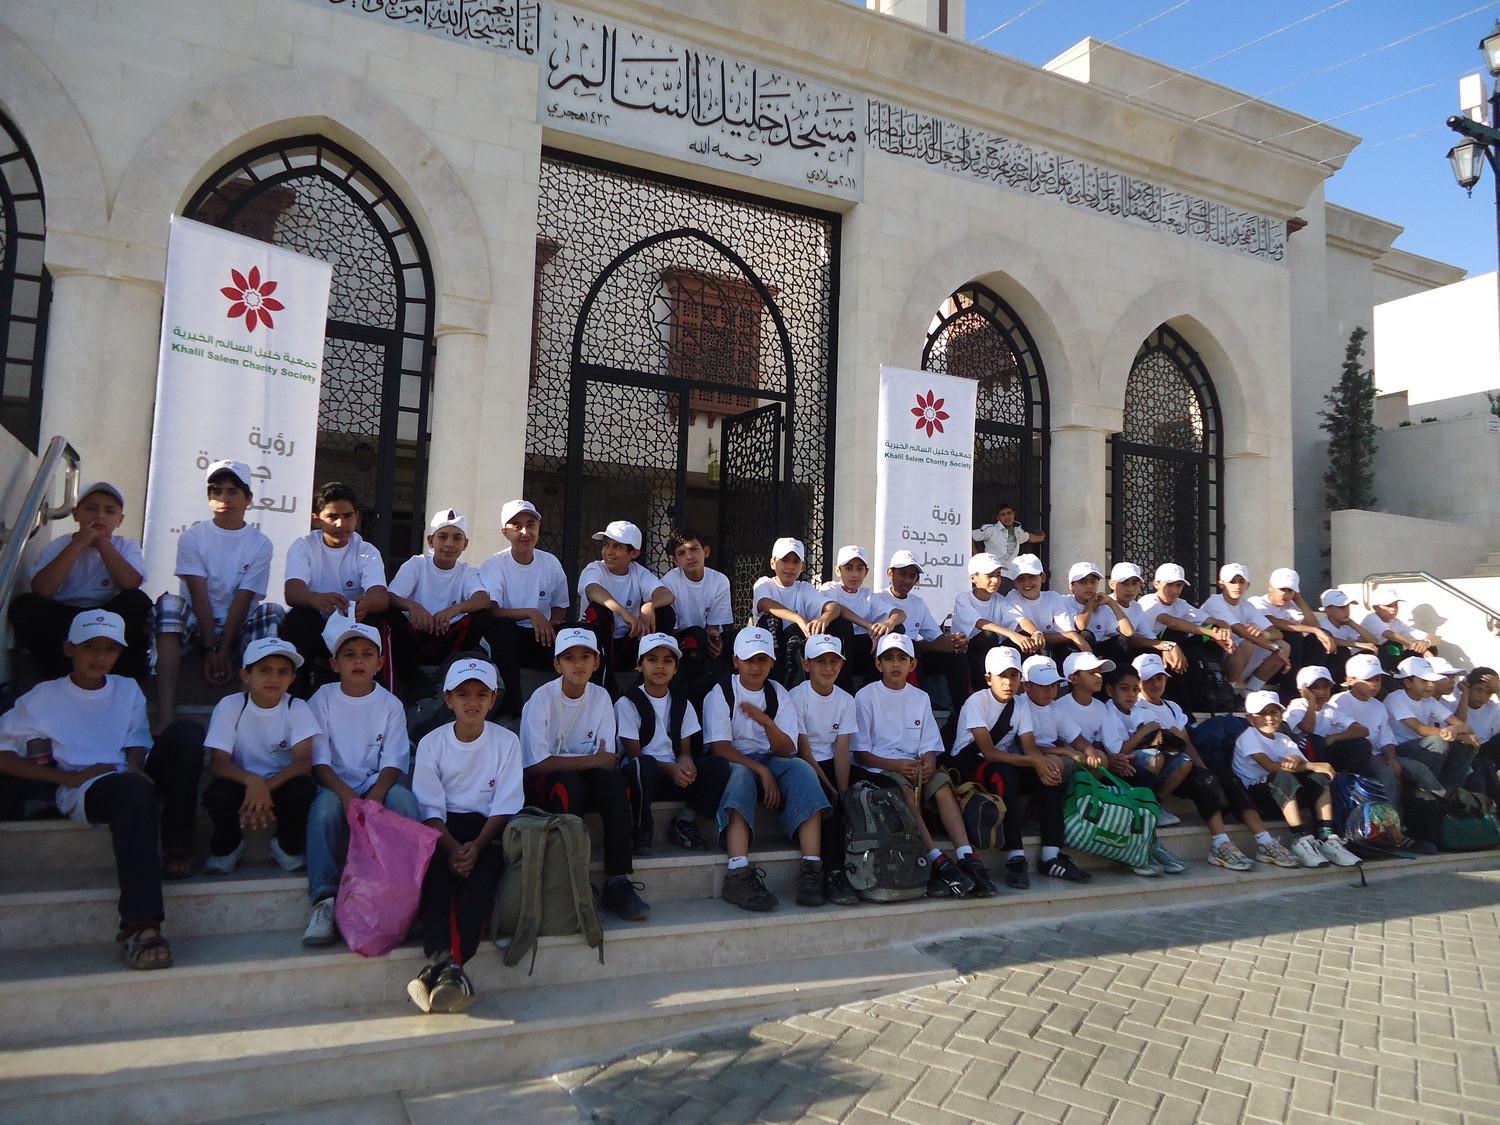 Boys Quran club in front of the main facade of the Mosque